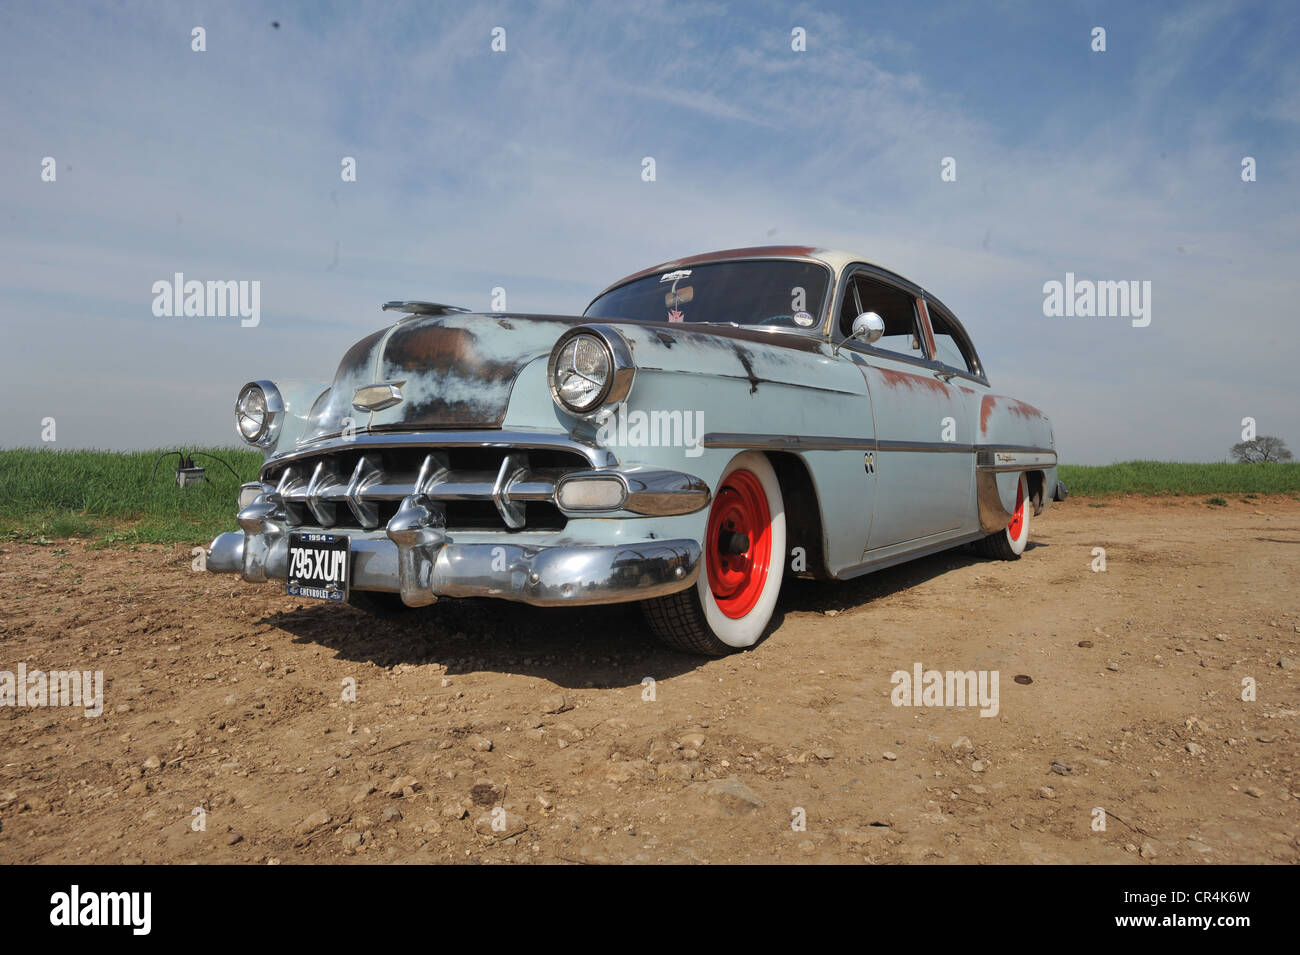 Rat look 1954 Chevrolet Bel air classic sun bleached American car, lightly hot rodded Stock Photo